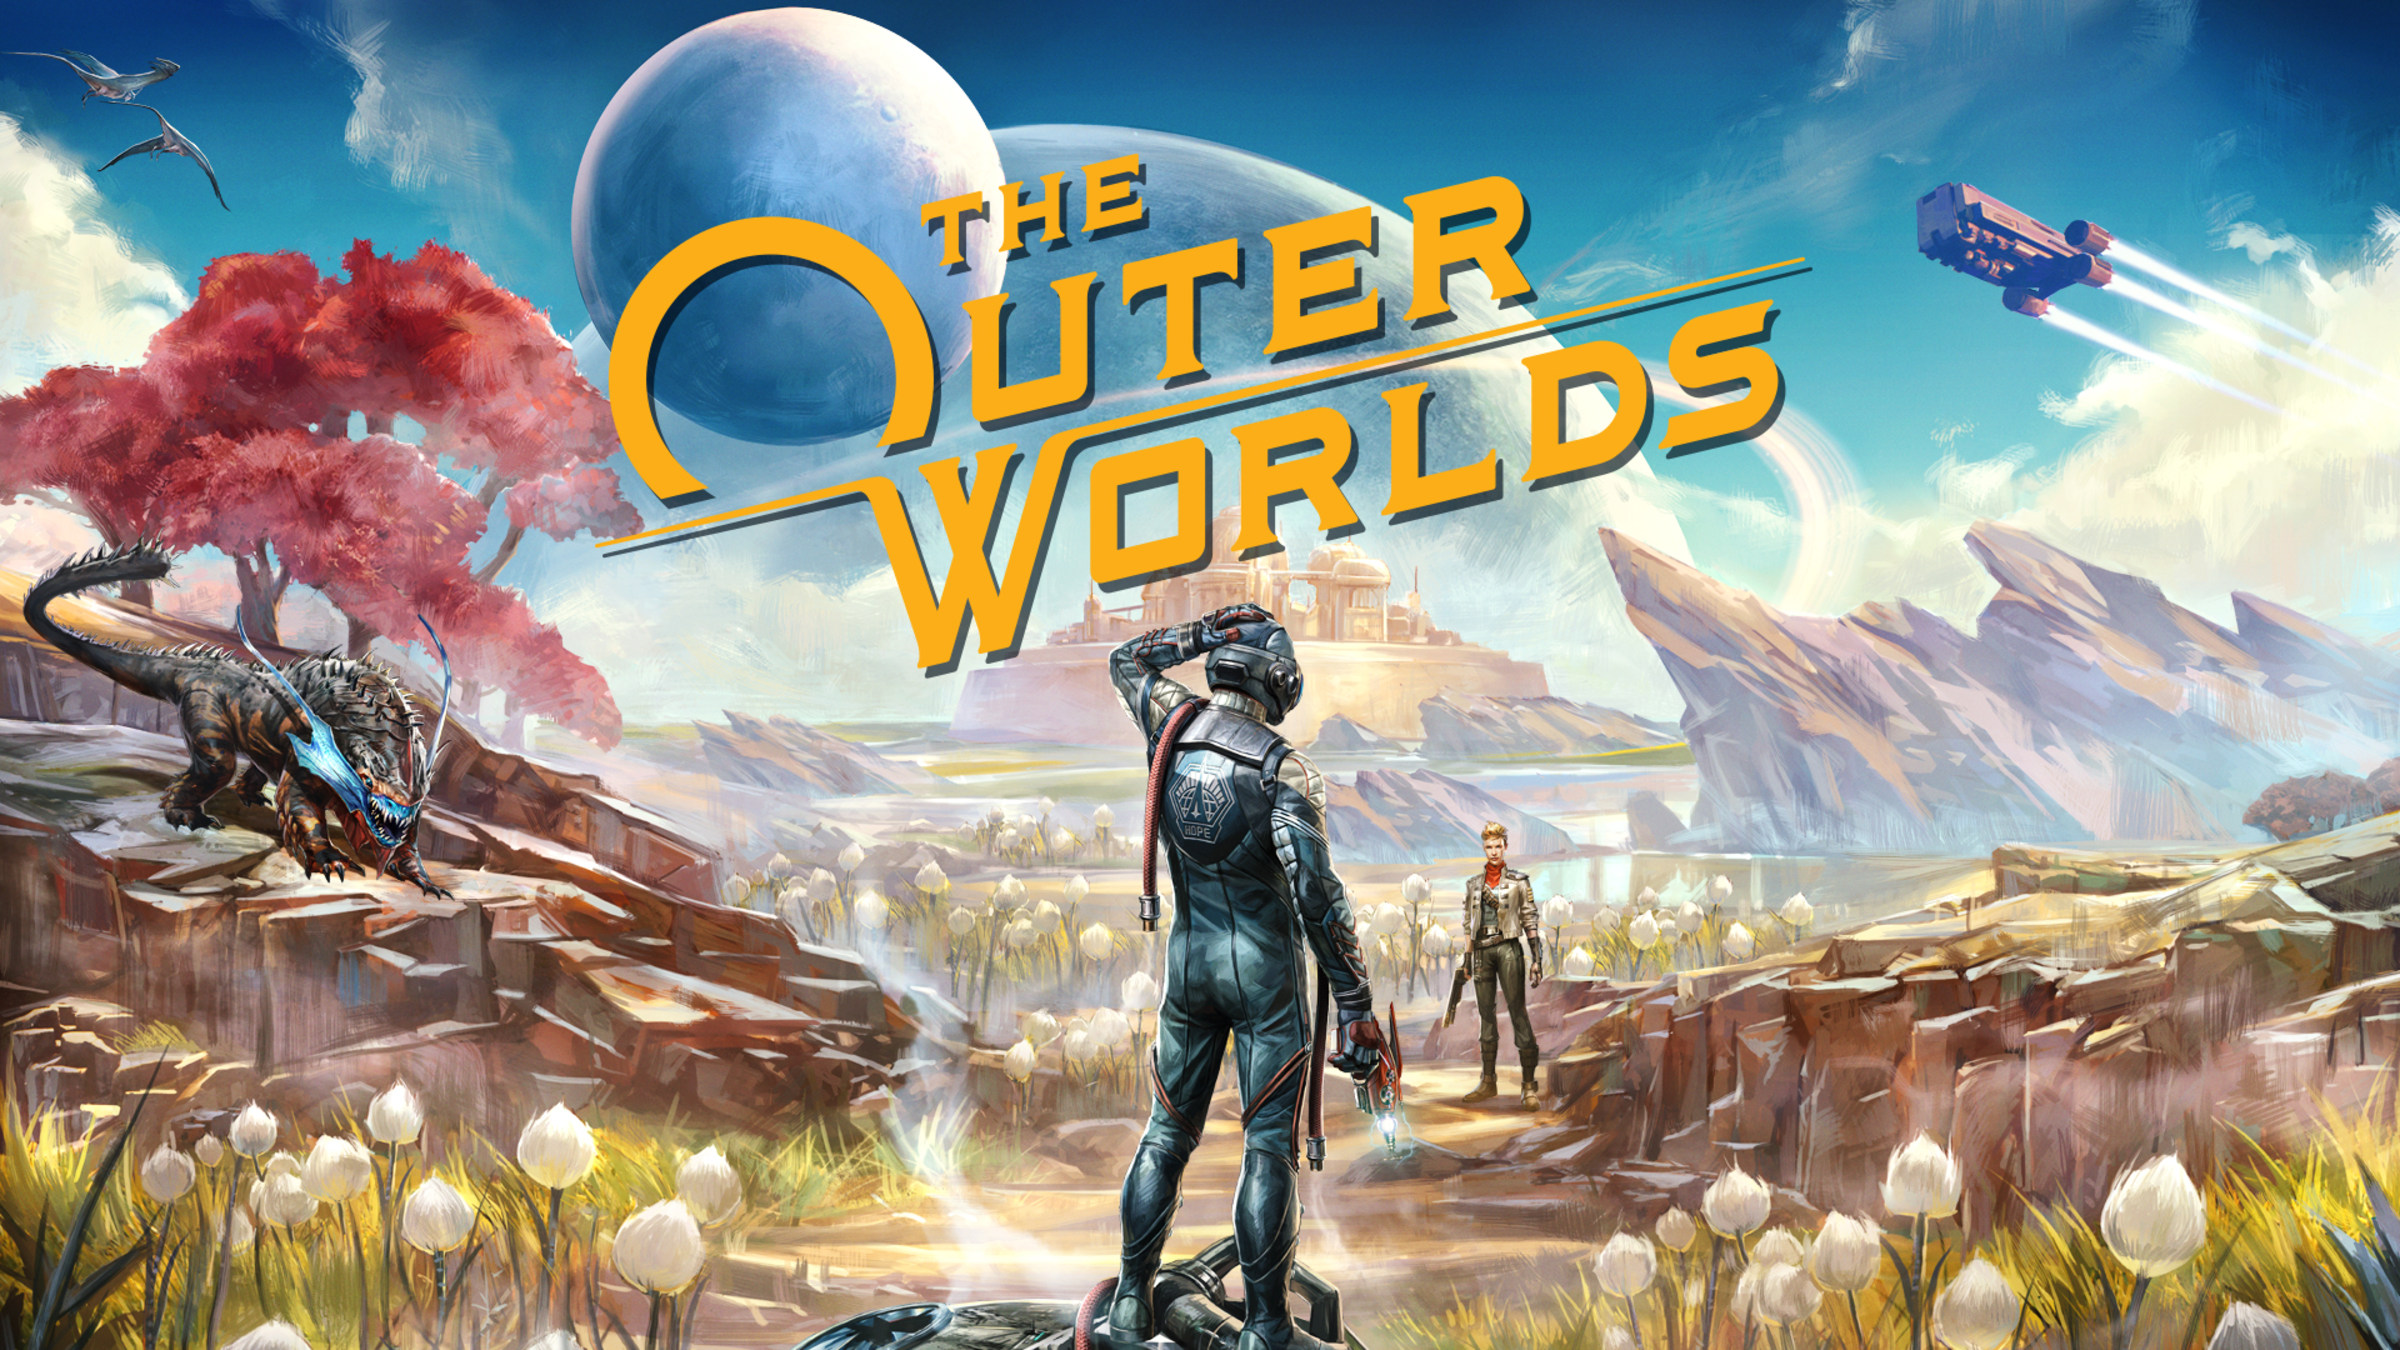  The Outer Worlds - Nintendo Switch : Take 2